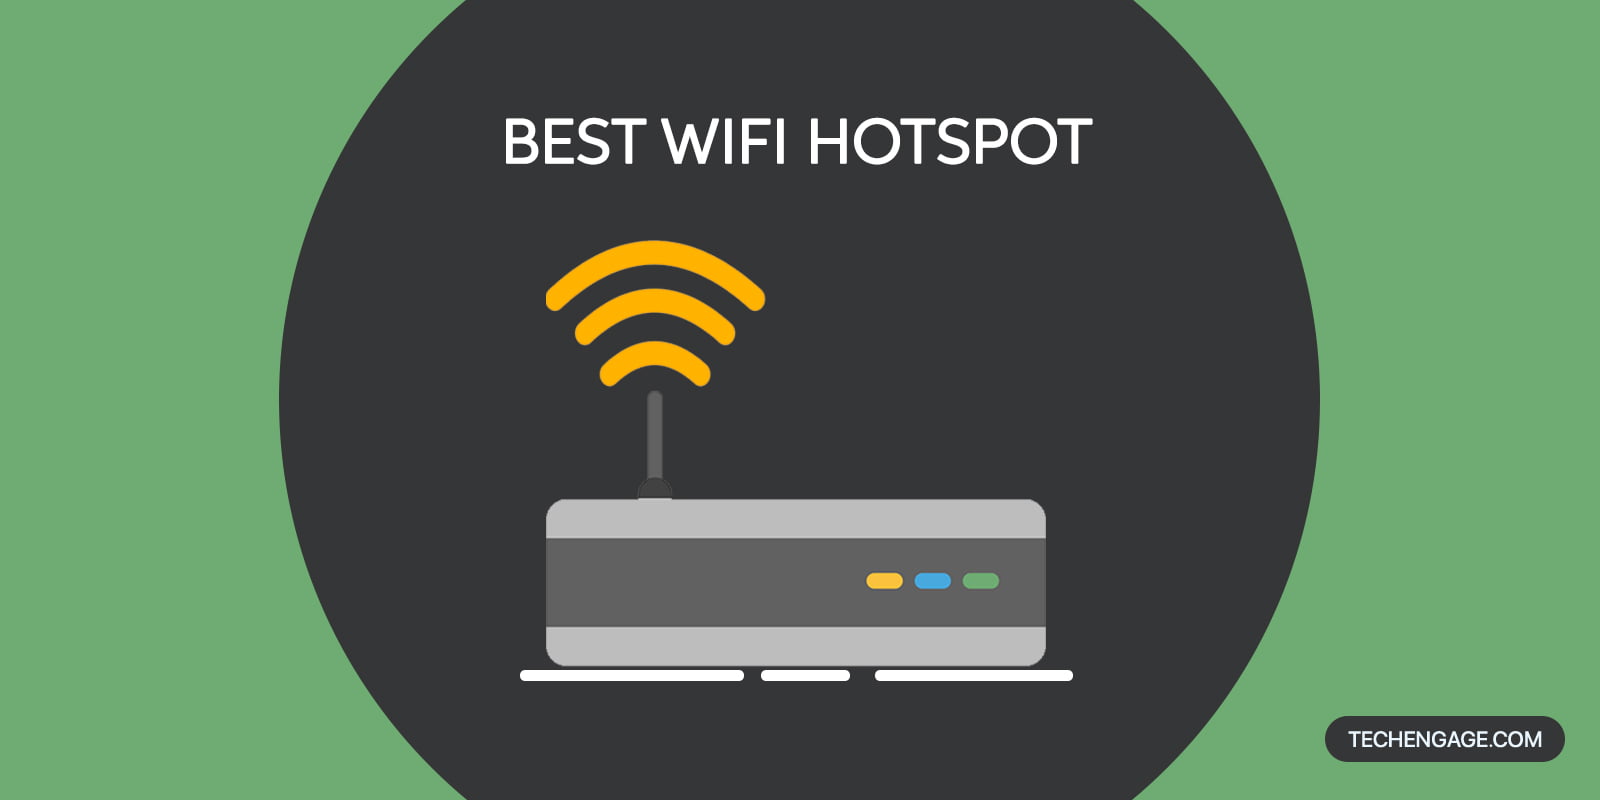 7 Best Mobile Wi-Fi Hotspots On Amazon For 2023